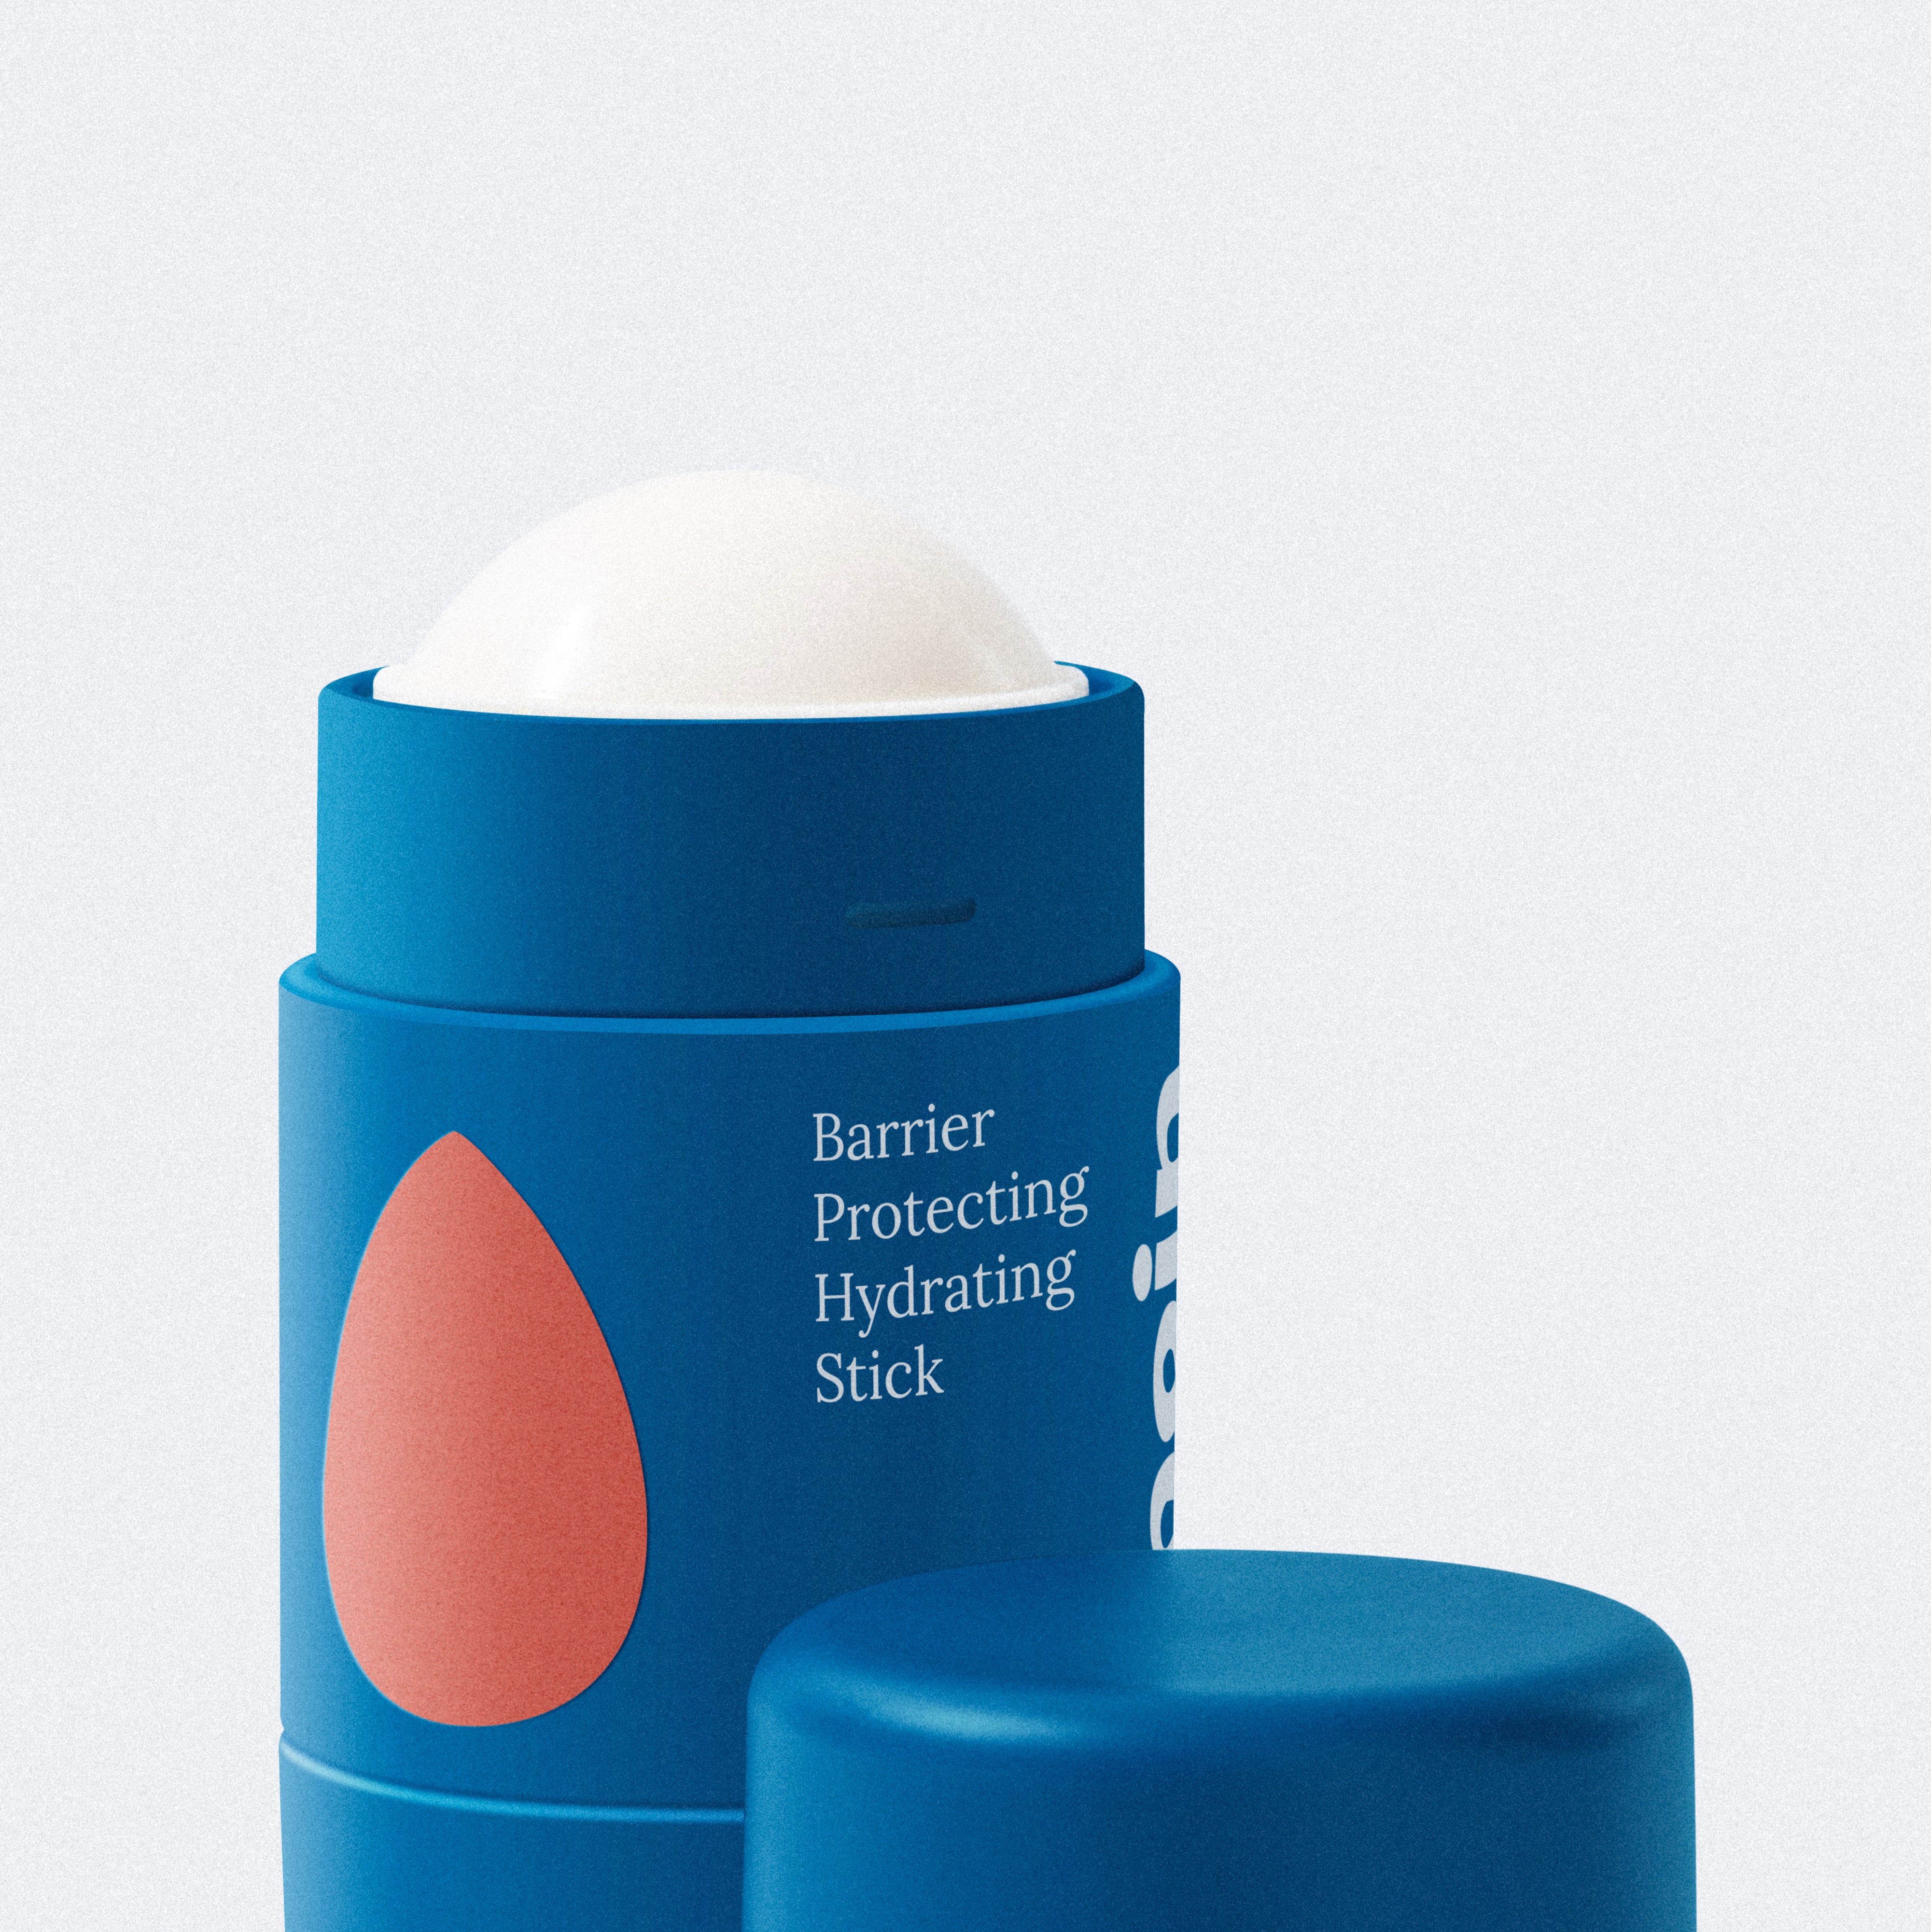 Barrier Protecting Hydrating Stick